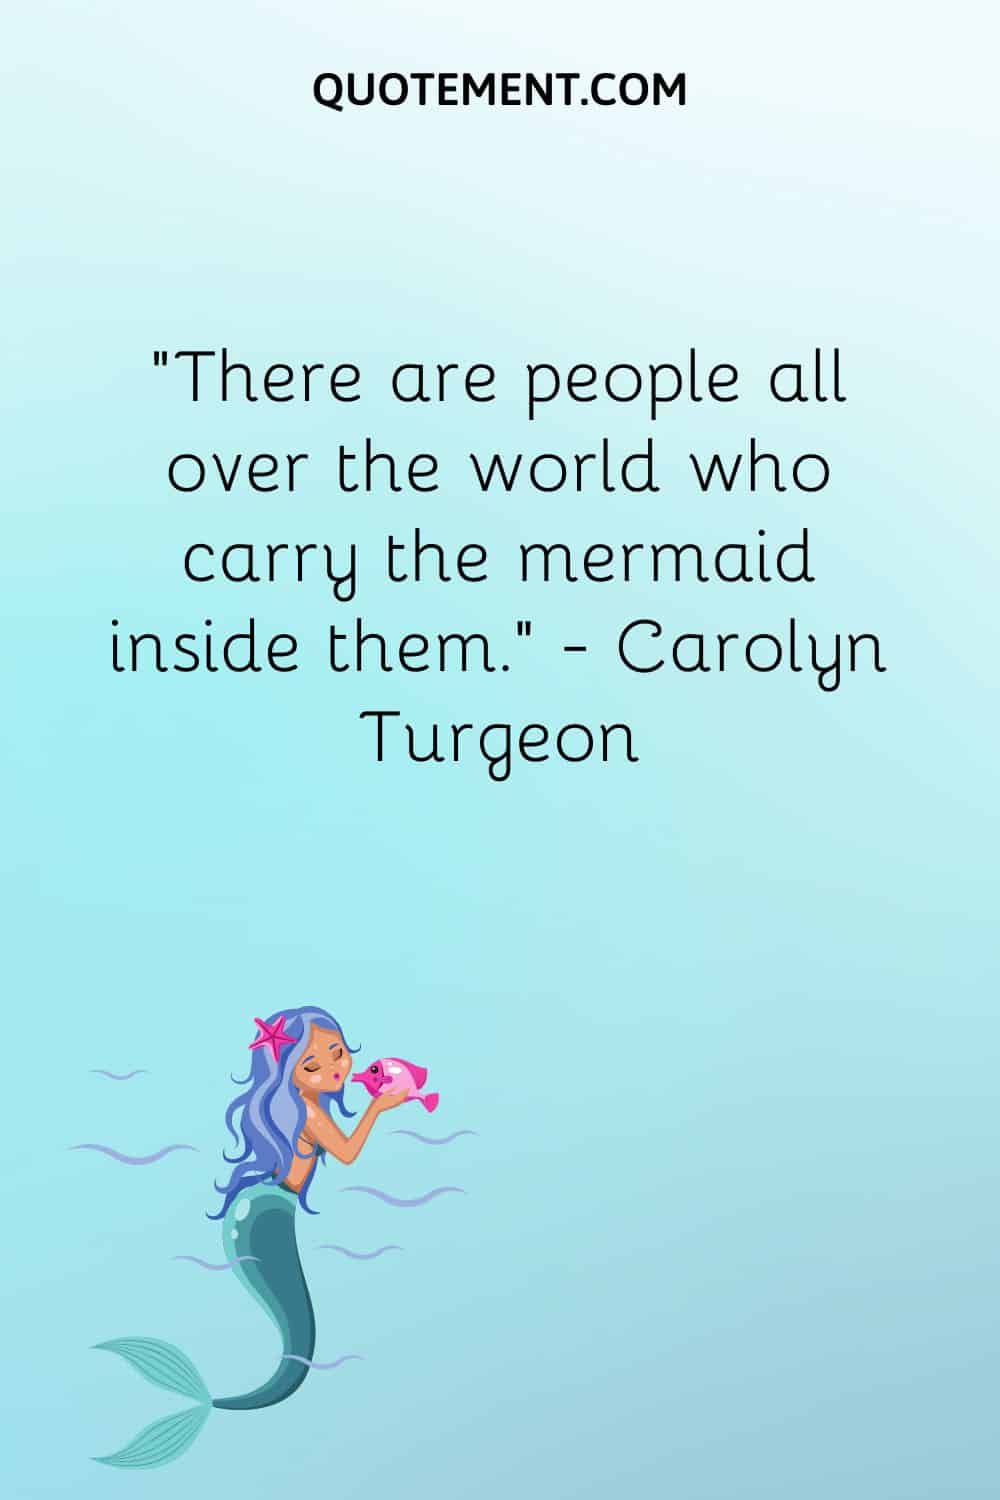 Mermaid quote and a mermaid in the sea.